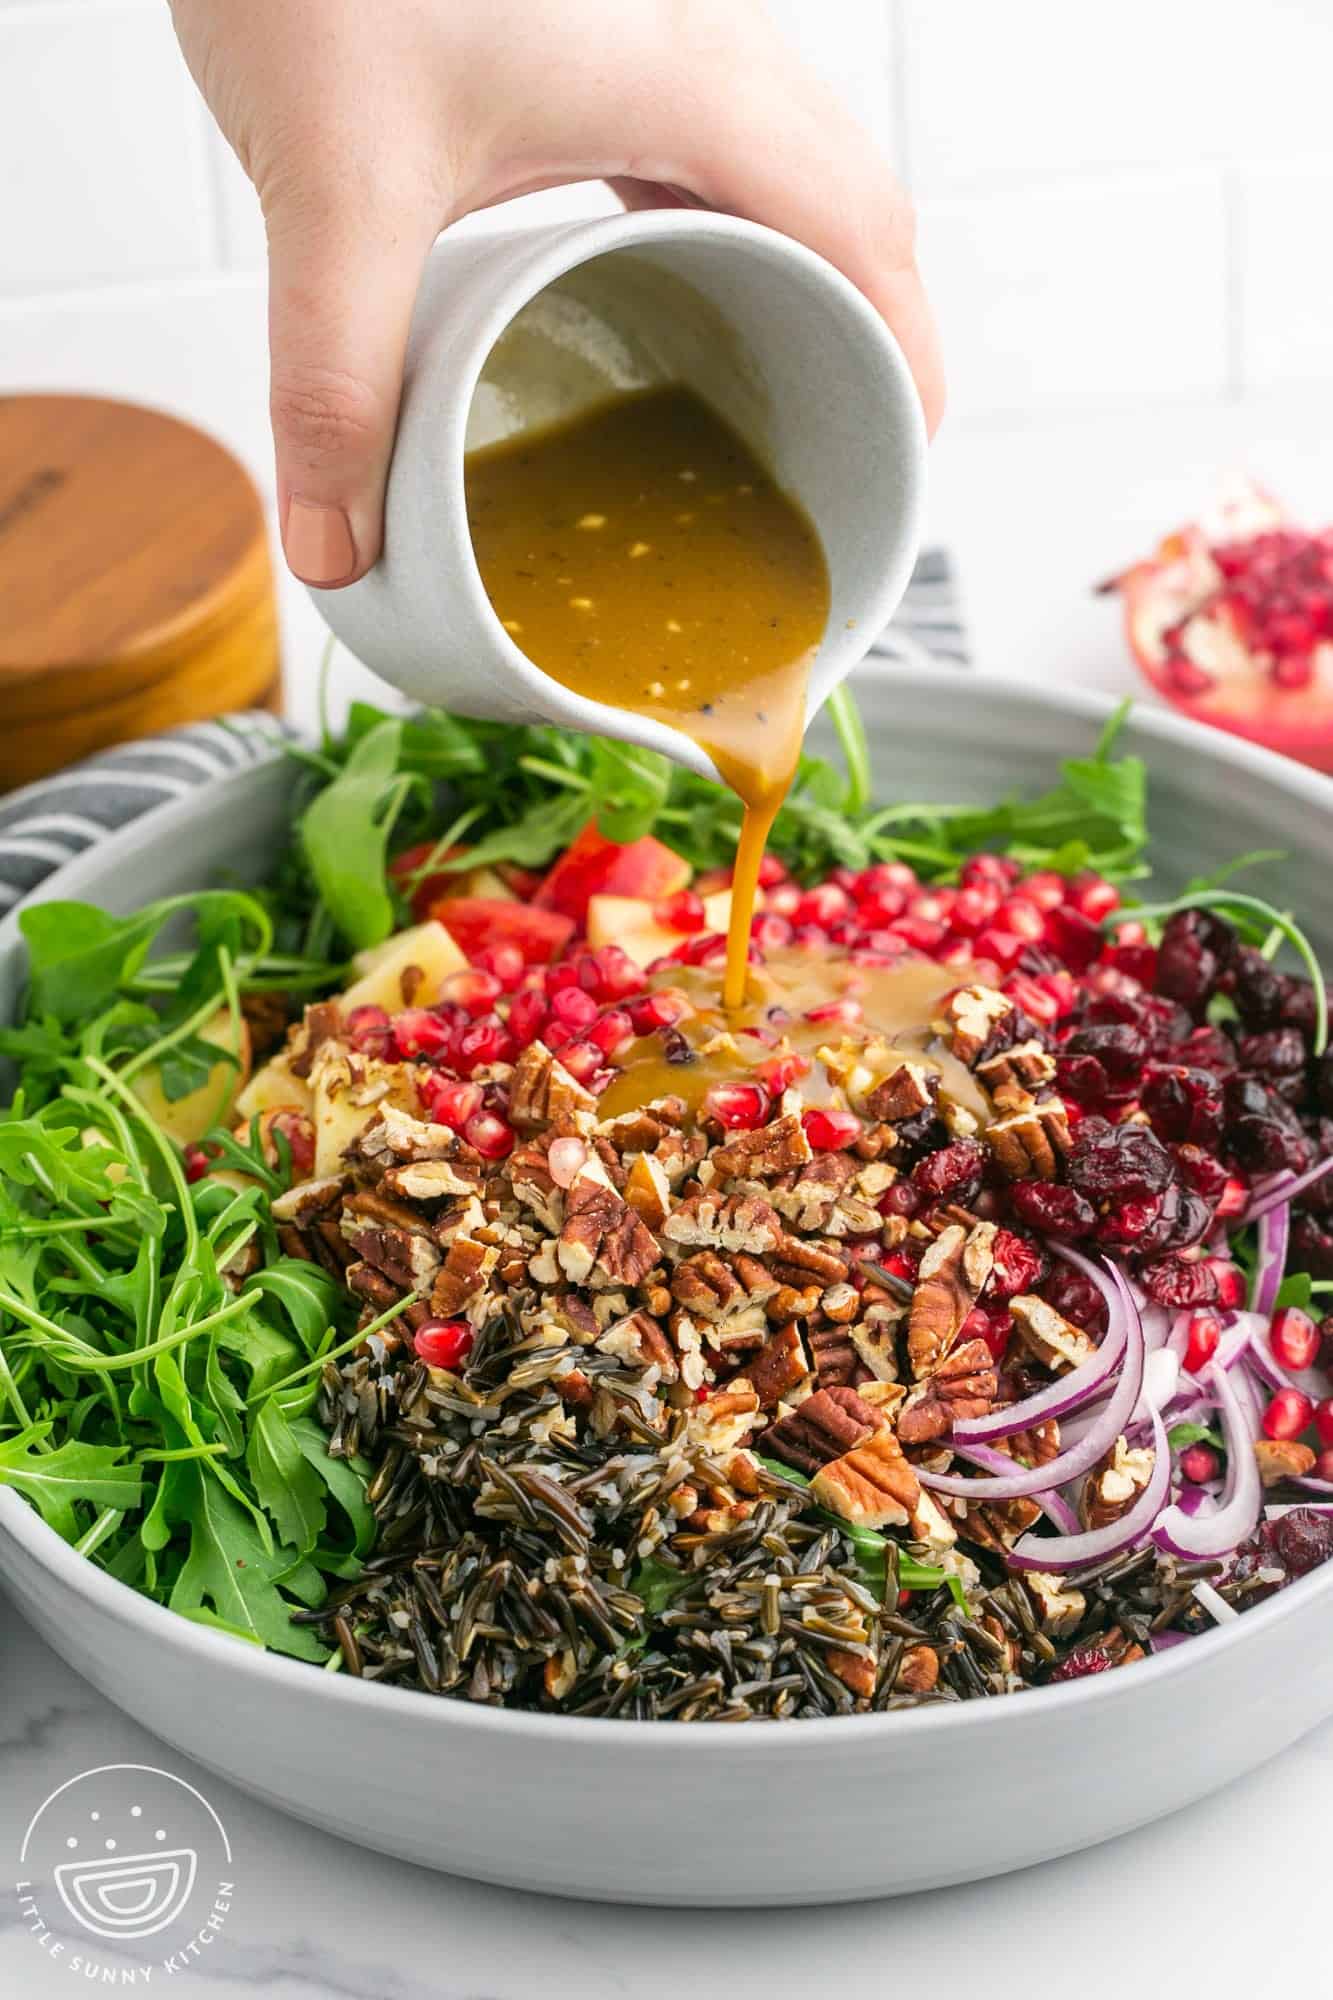 a hand pouring salad dressing over a bowl of arugula (rocket), wild rice and other salad toppings.